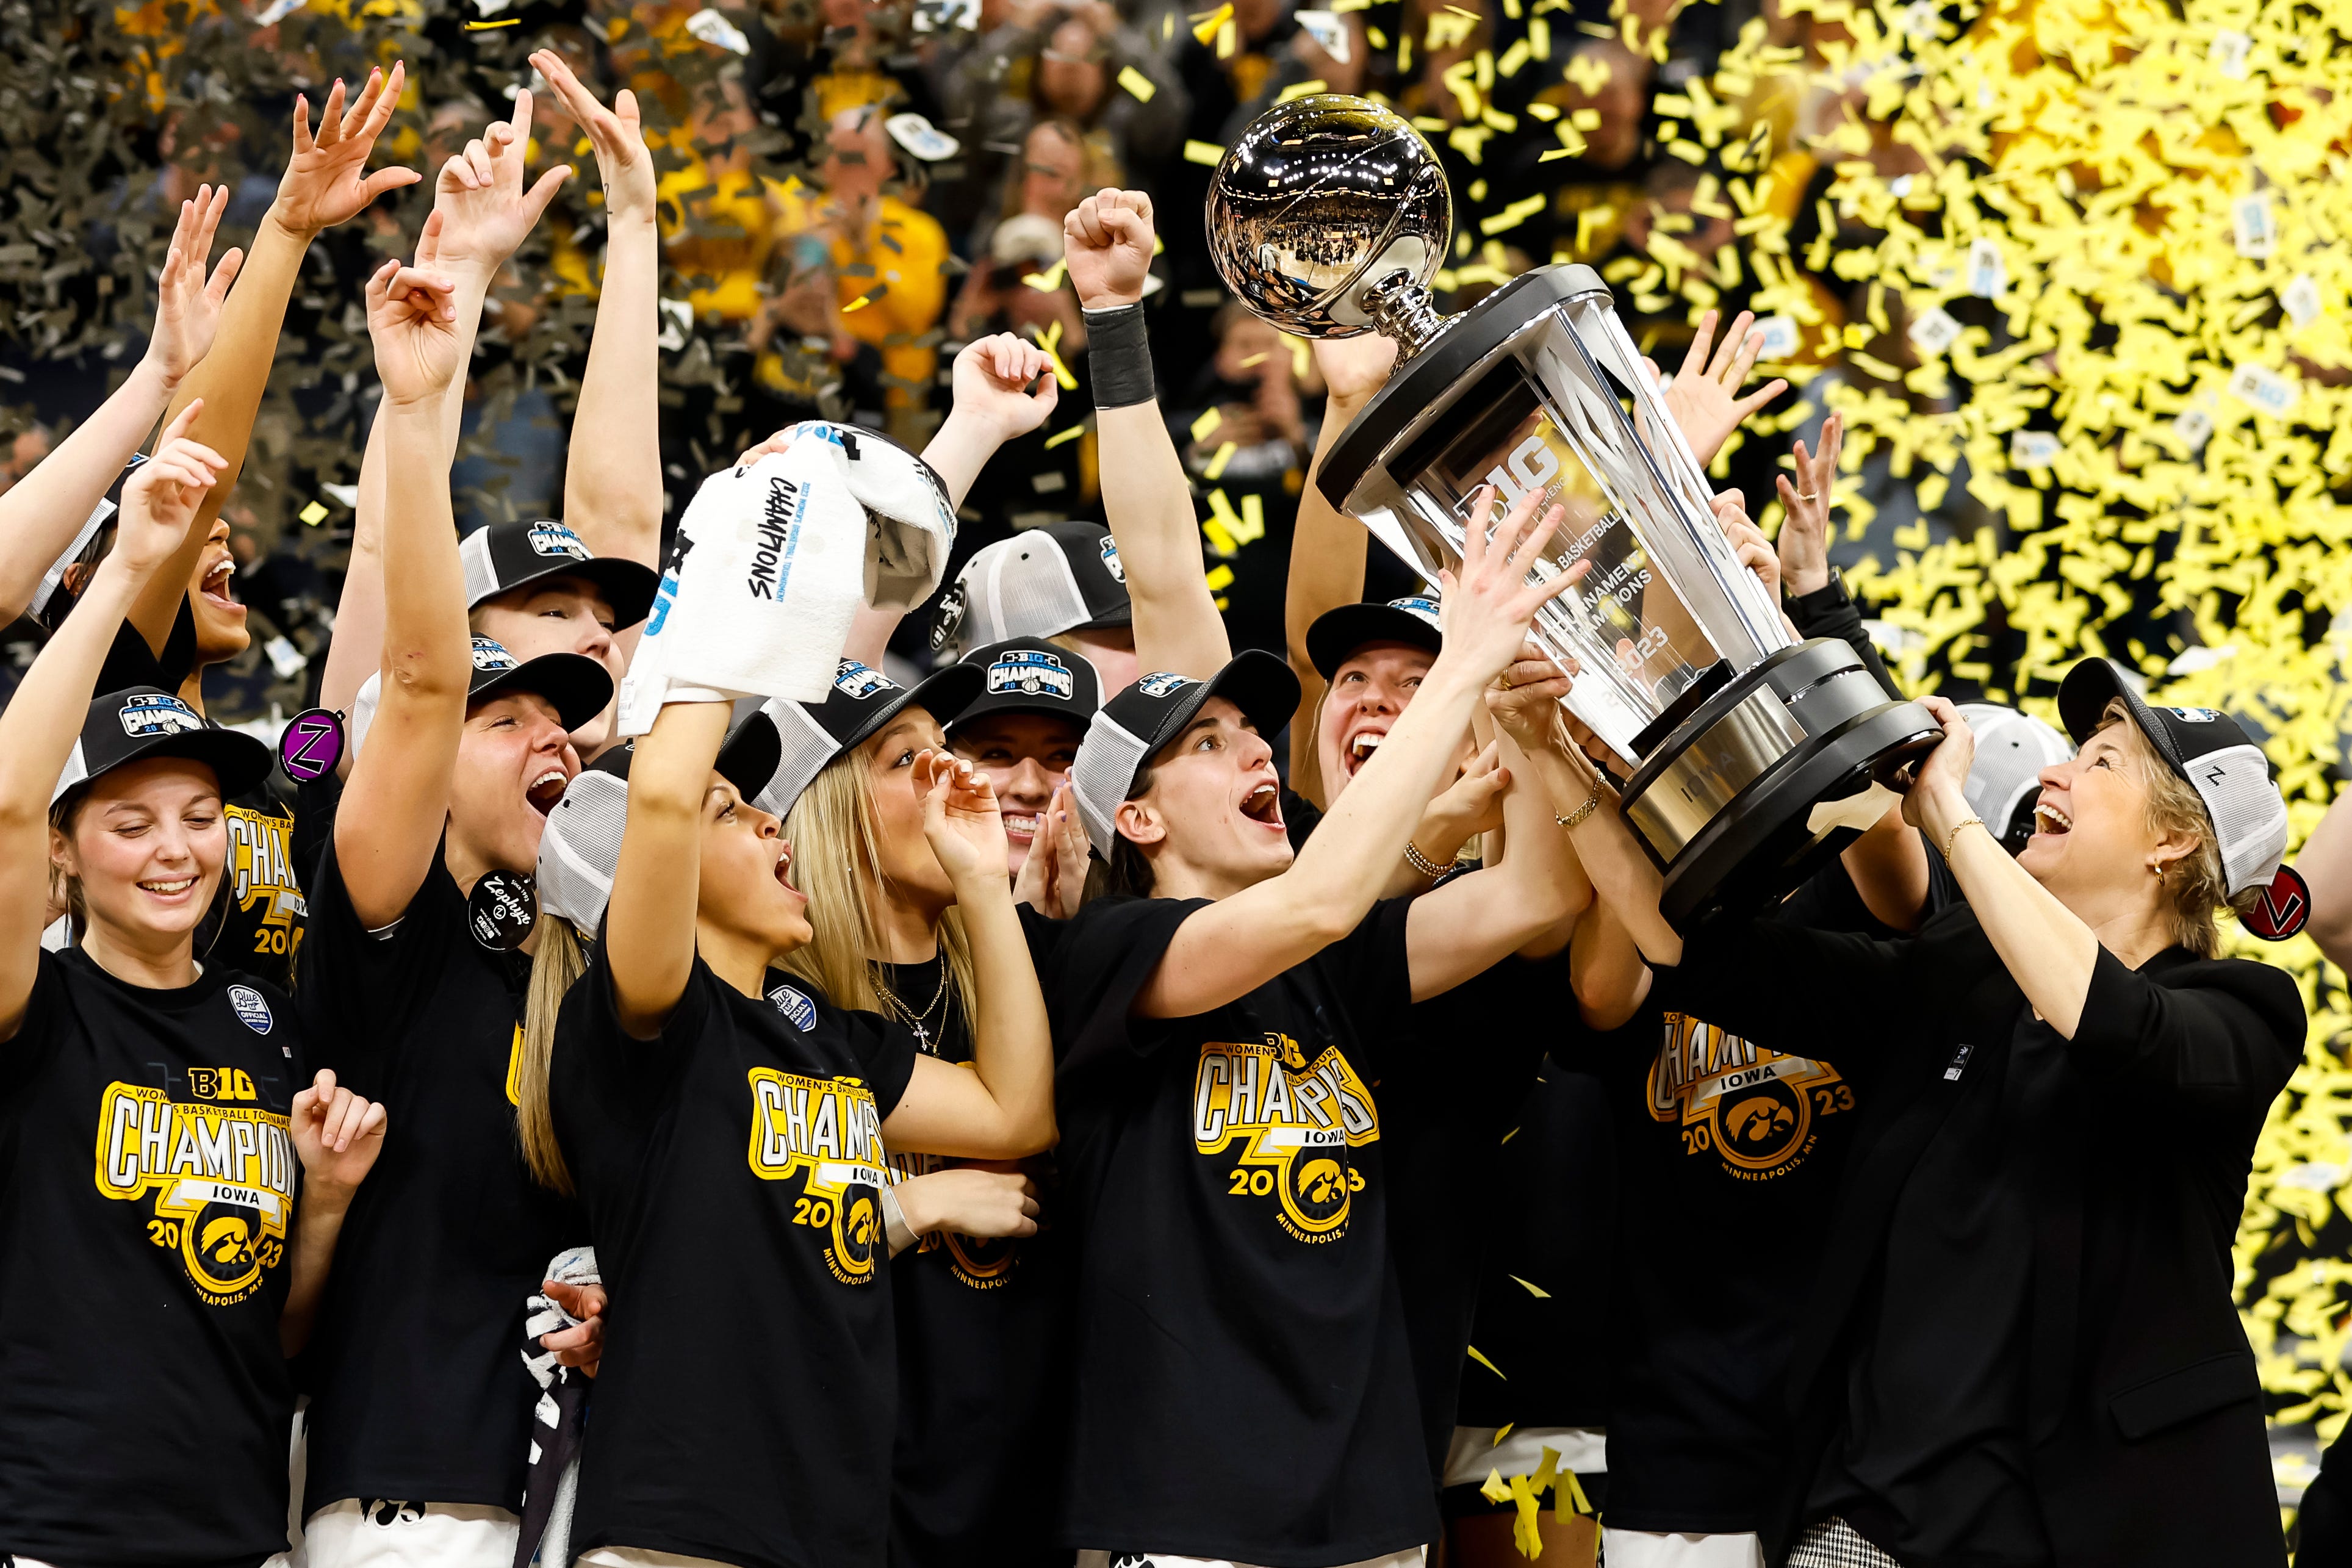 Iowa guard Caitlin Clark and head coach Lisa Bluder lift the trophy while the Hawkeyes celebrate their victory against the Ohio State Buckeyes with the trophy after the championship game of the Big Ten Women's Basketball Tournament at Target Center on March 5, 2023 in Minneapolis, Minn. The Hawkeyes defeated the Buckeyes 105-72.